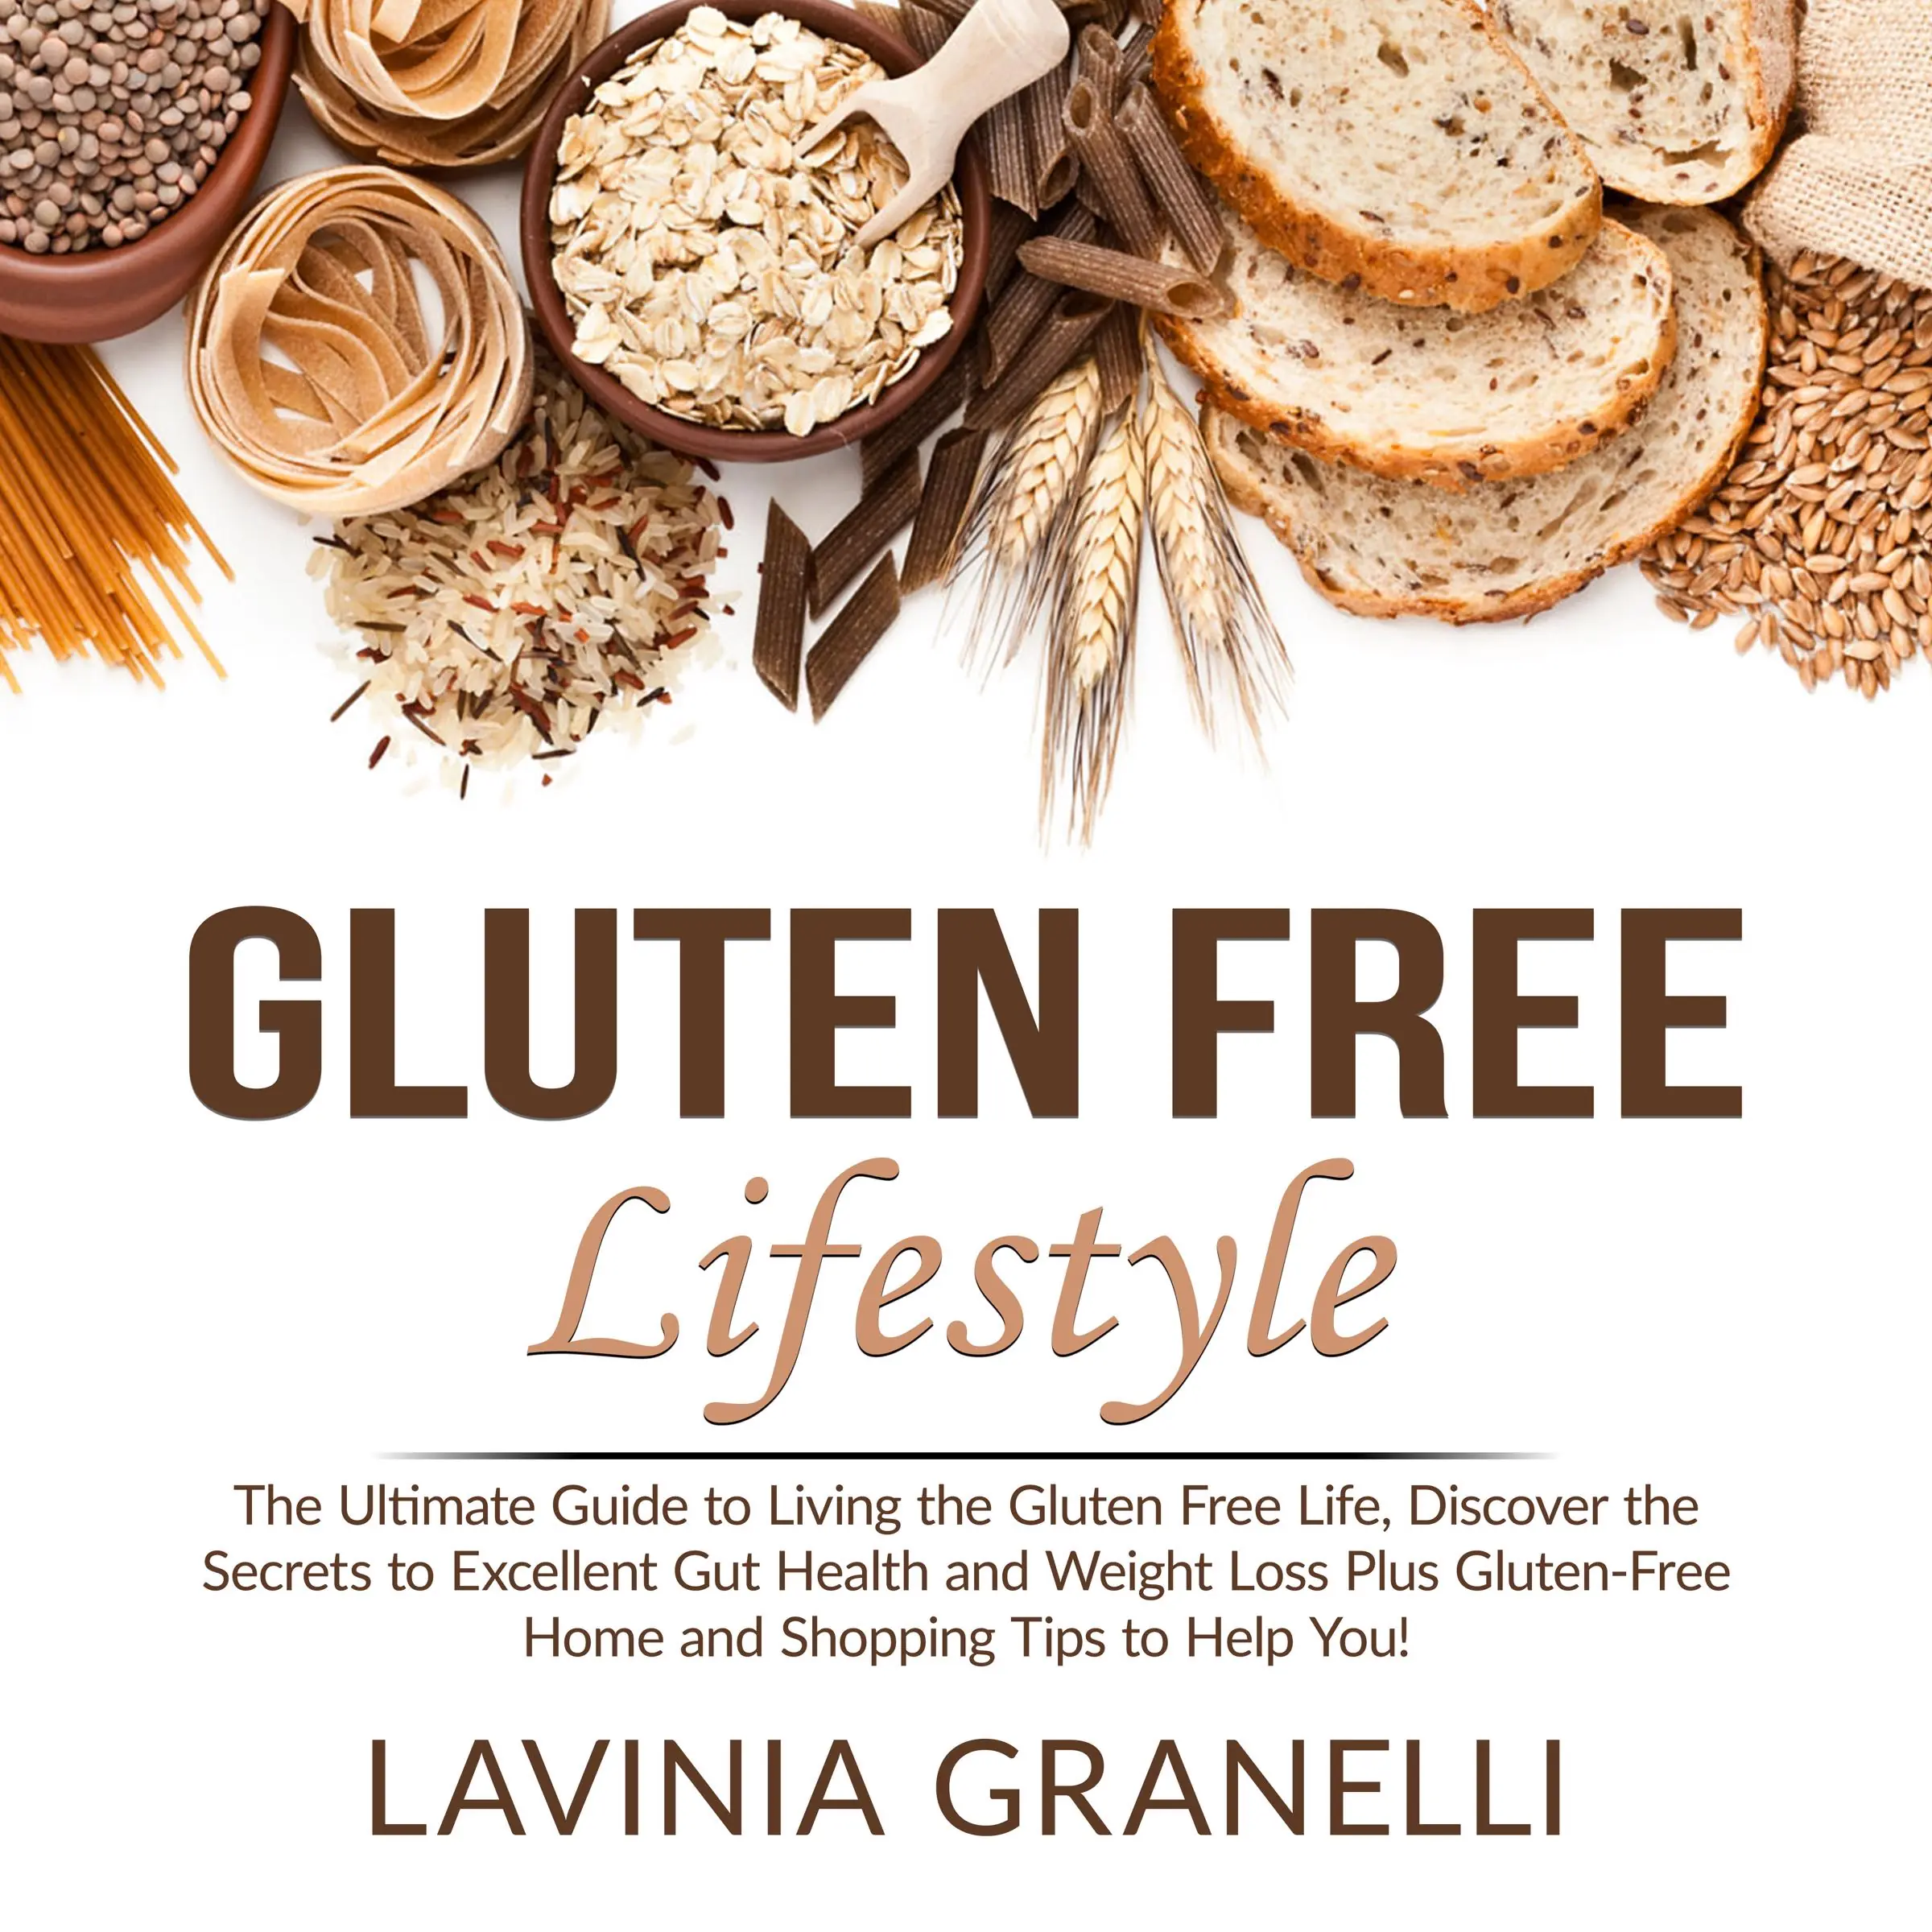 Gluten Free Lifestyle: The Ultimate Guide to Living the Gluten Free Life, Discover the Secrets to Excellent Gut Health and Weight Loss Plus Gluten-Free Home and Shopping Tips to Help You! Audiobook by Lavinia Granelli